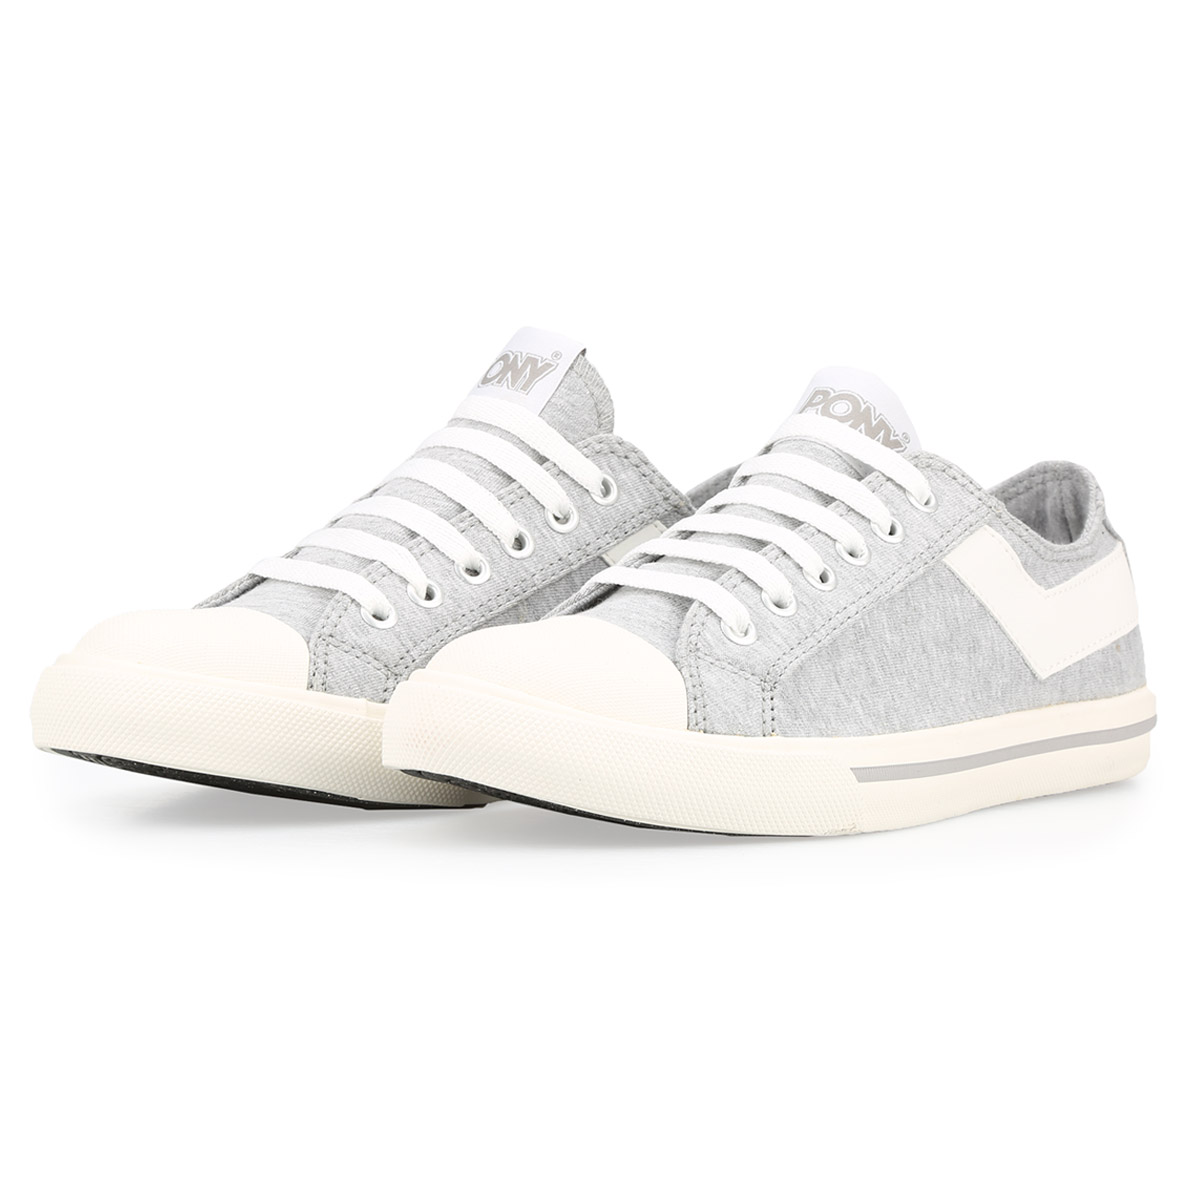 Zapatillas Pony Shooter Ox Mesh,  image number null